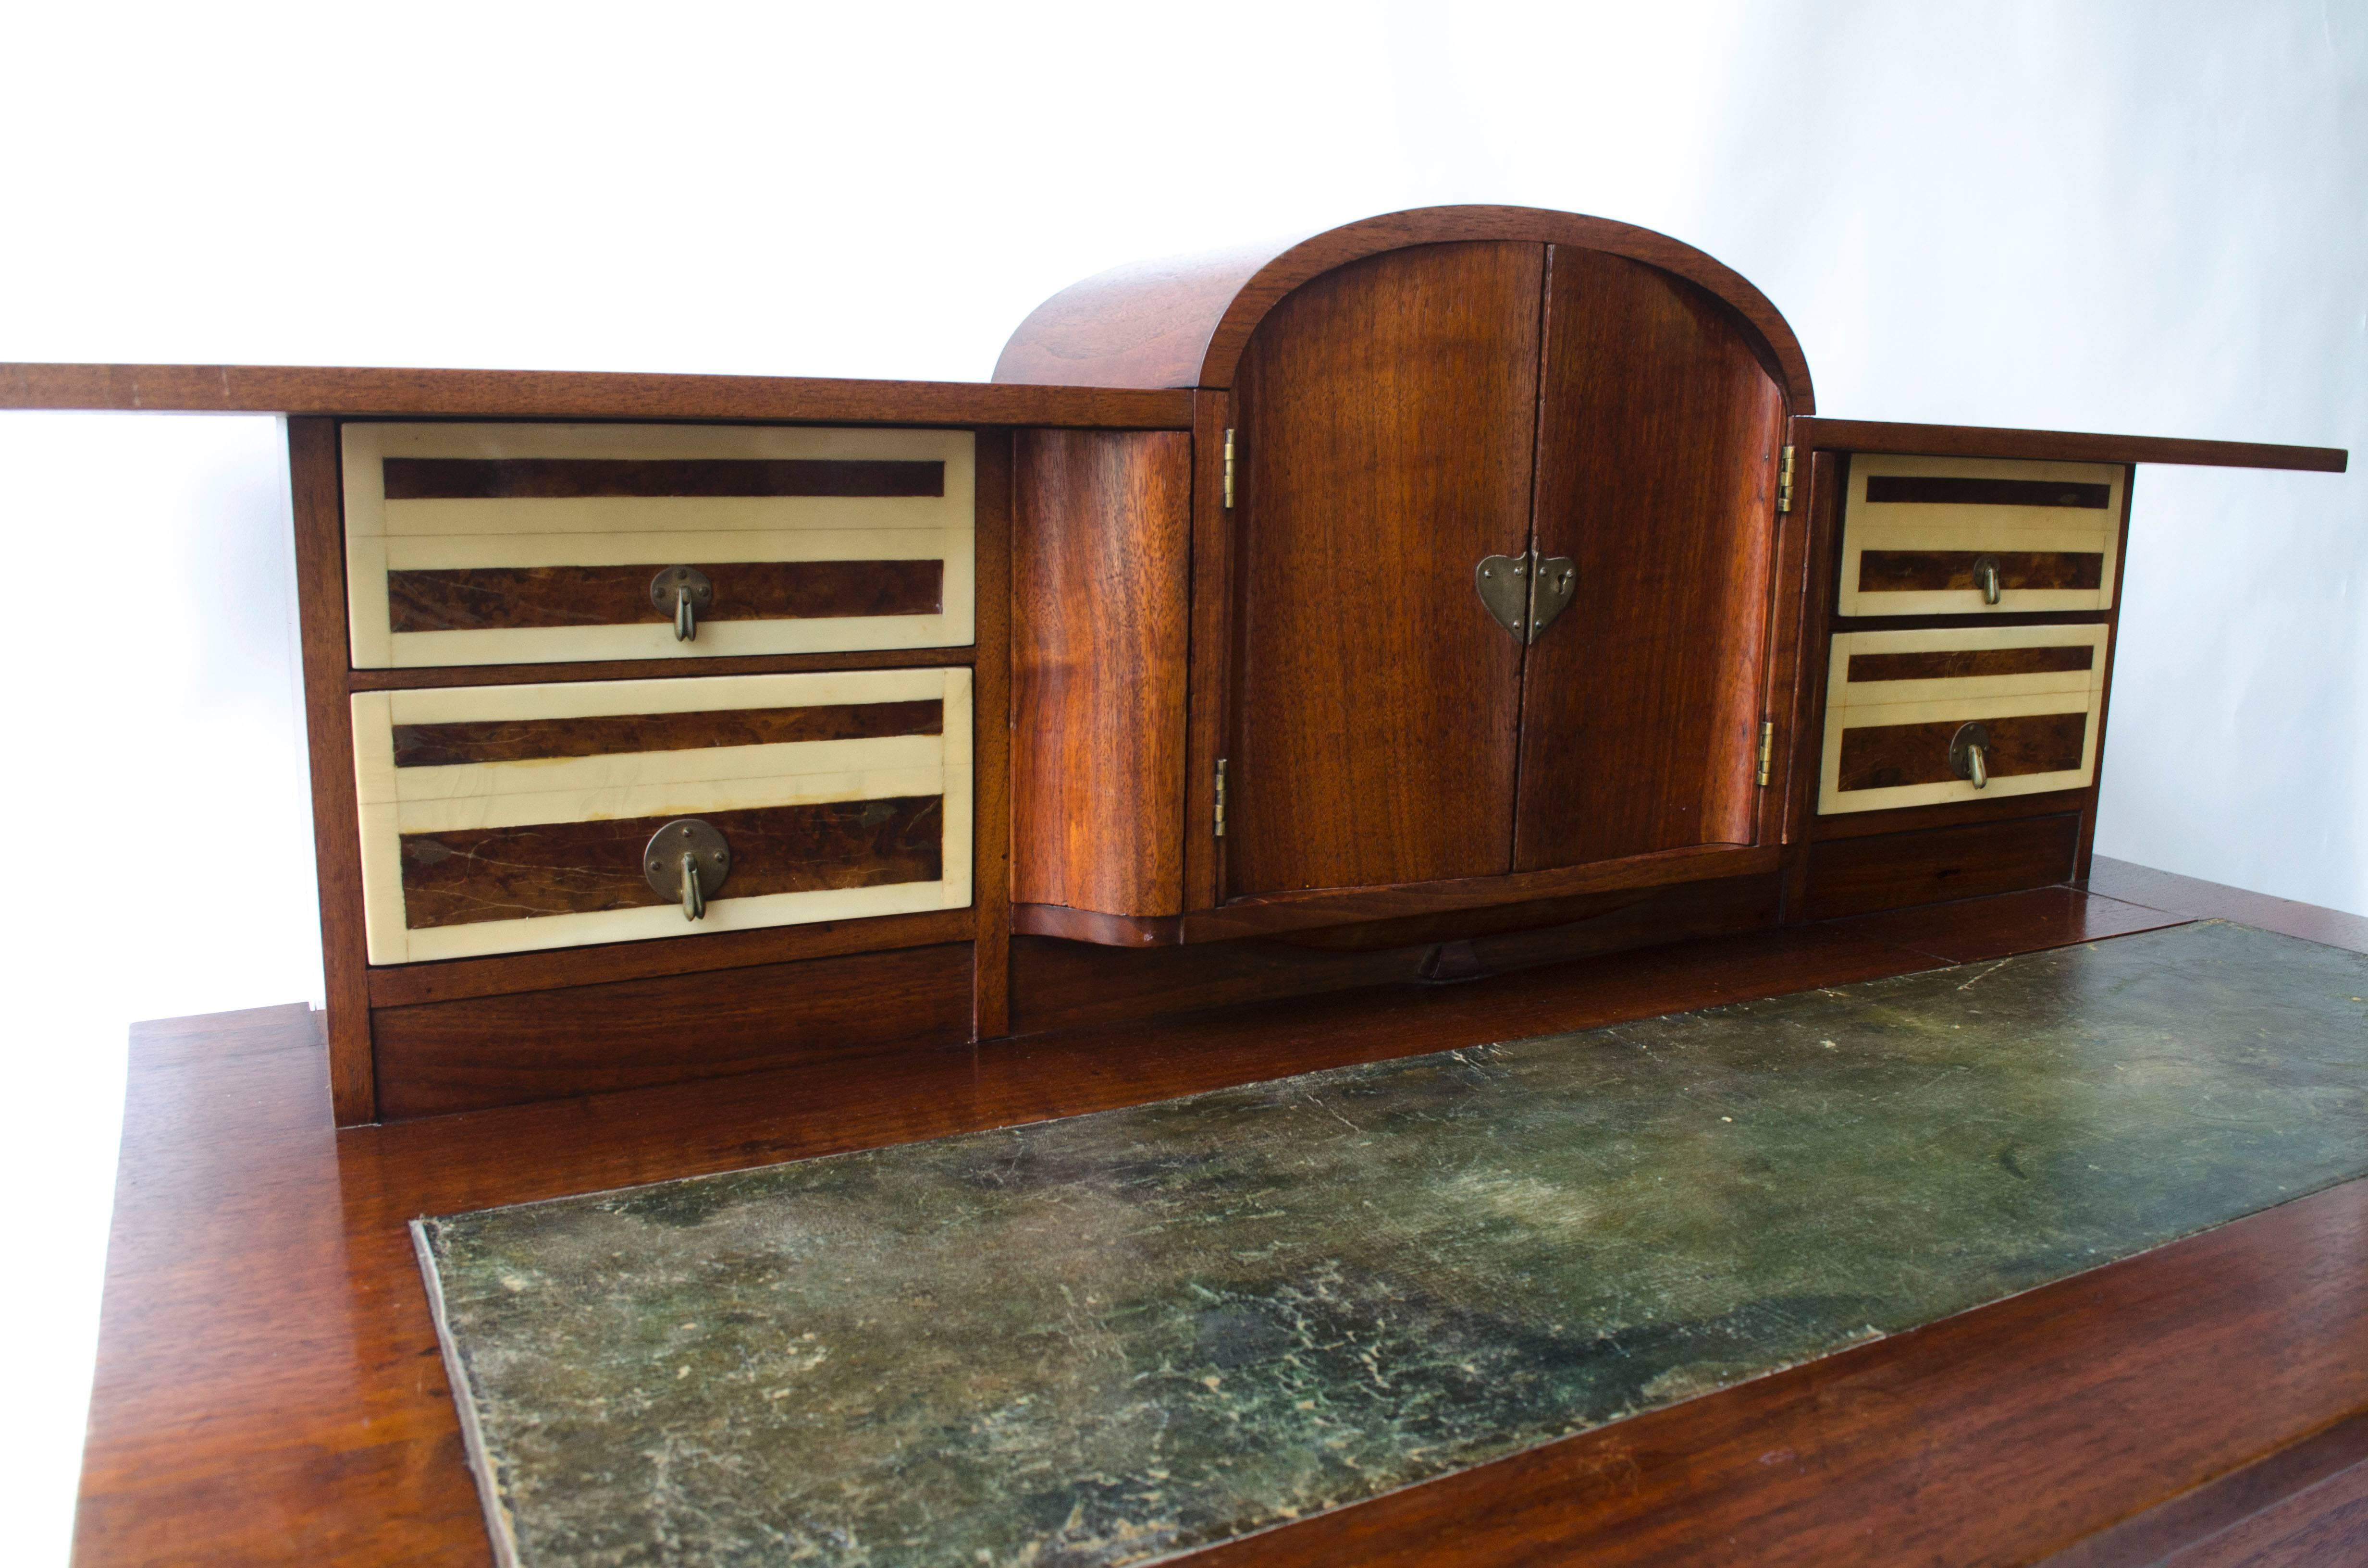 George Walton. A rare Arts and Crafts walnut desk almost identical to the desk Walton designed in 1898 for Sidney Leetham for the morning room in Elm Bank, a major interior commission in York, England.
This desk is a complex hybrid design. The